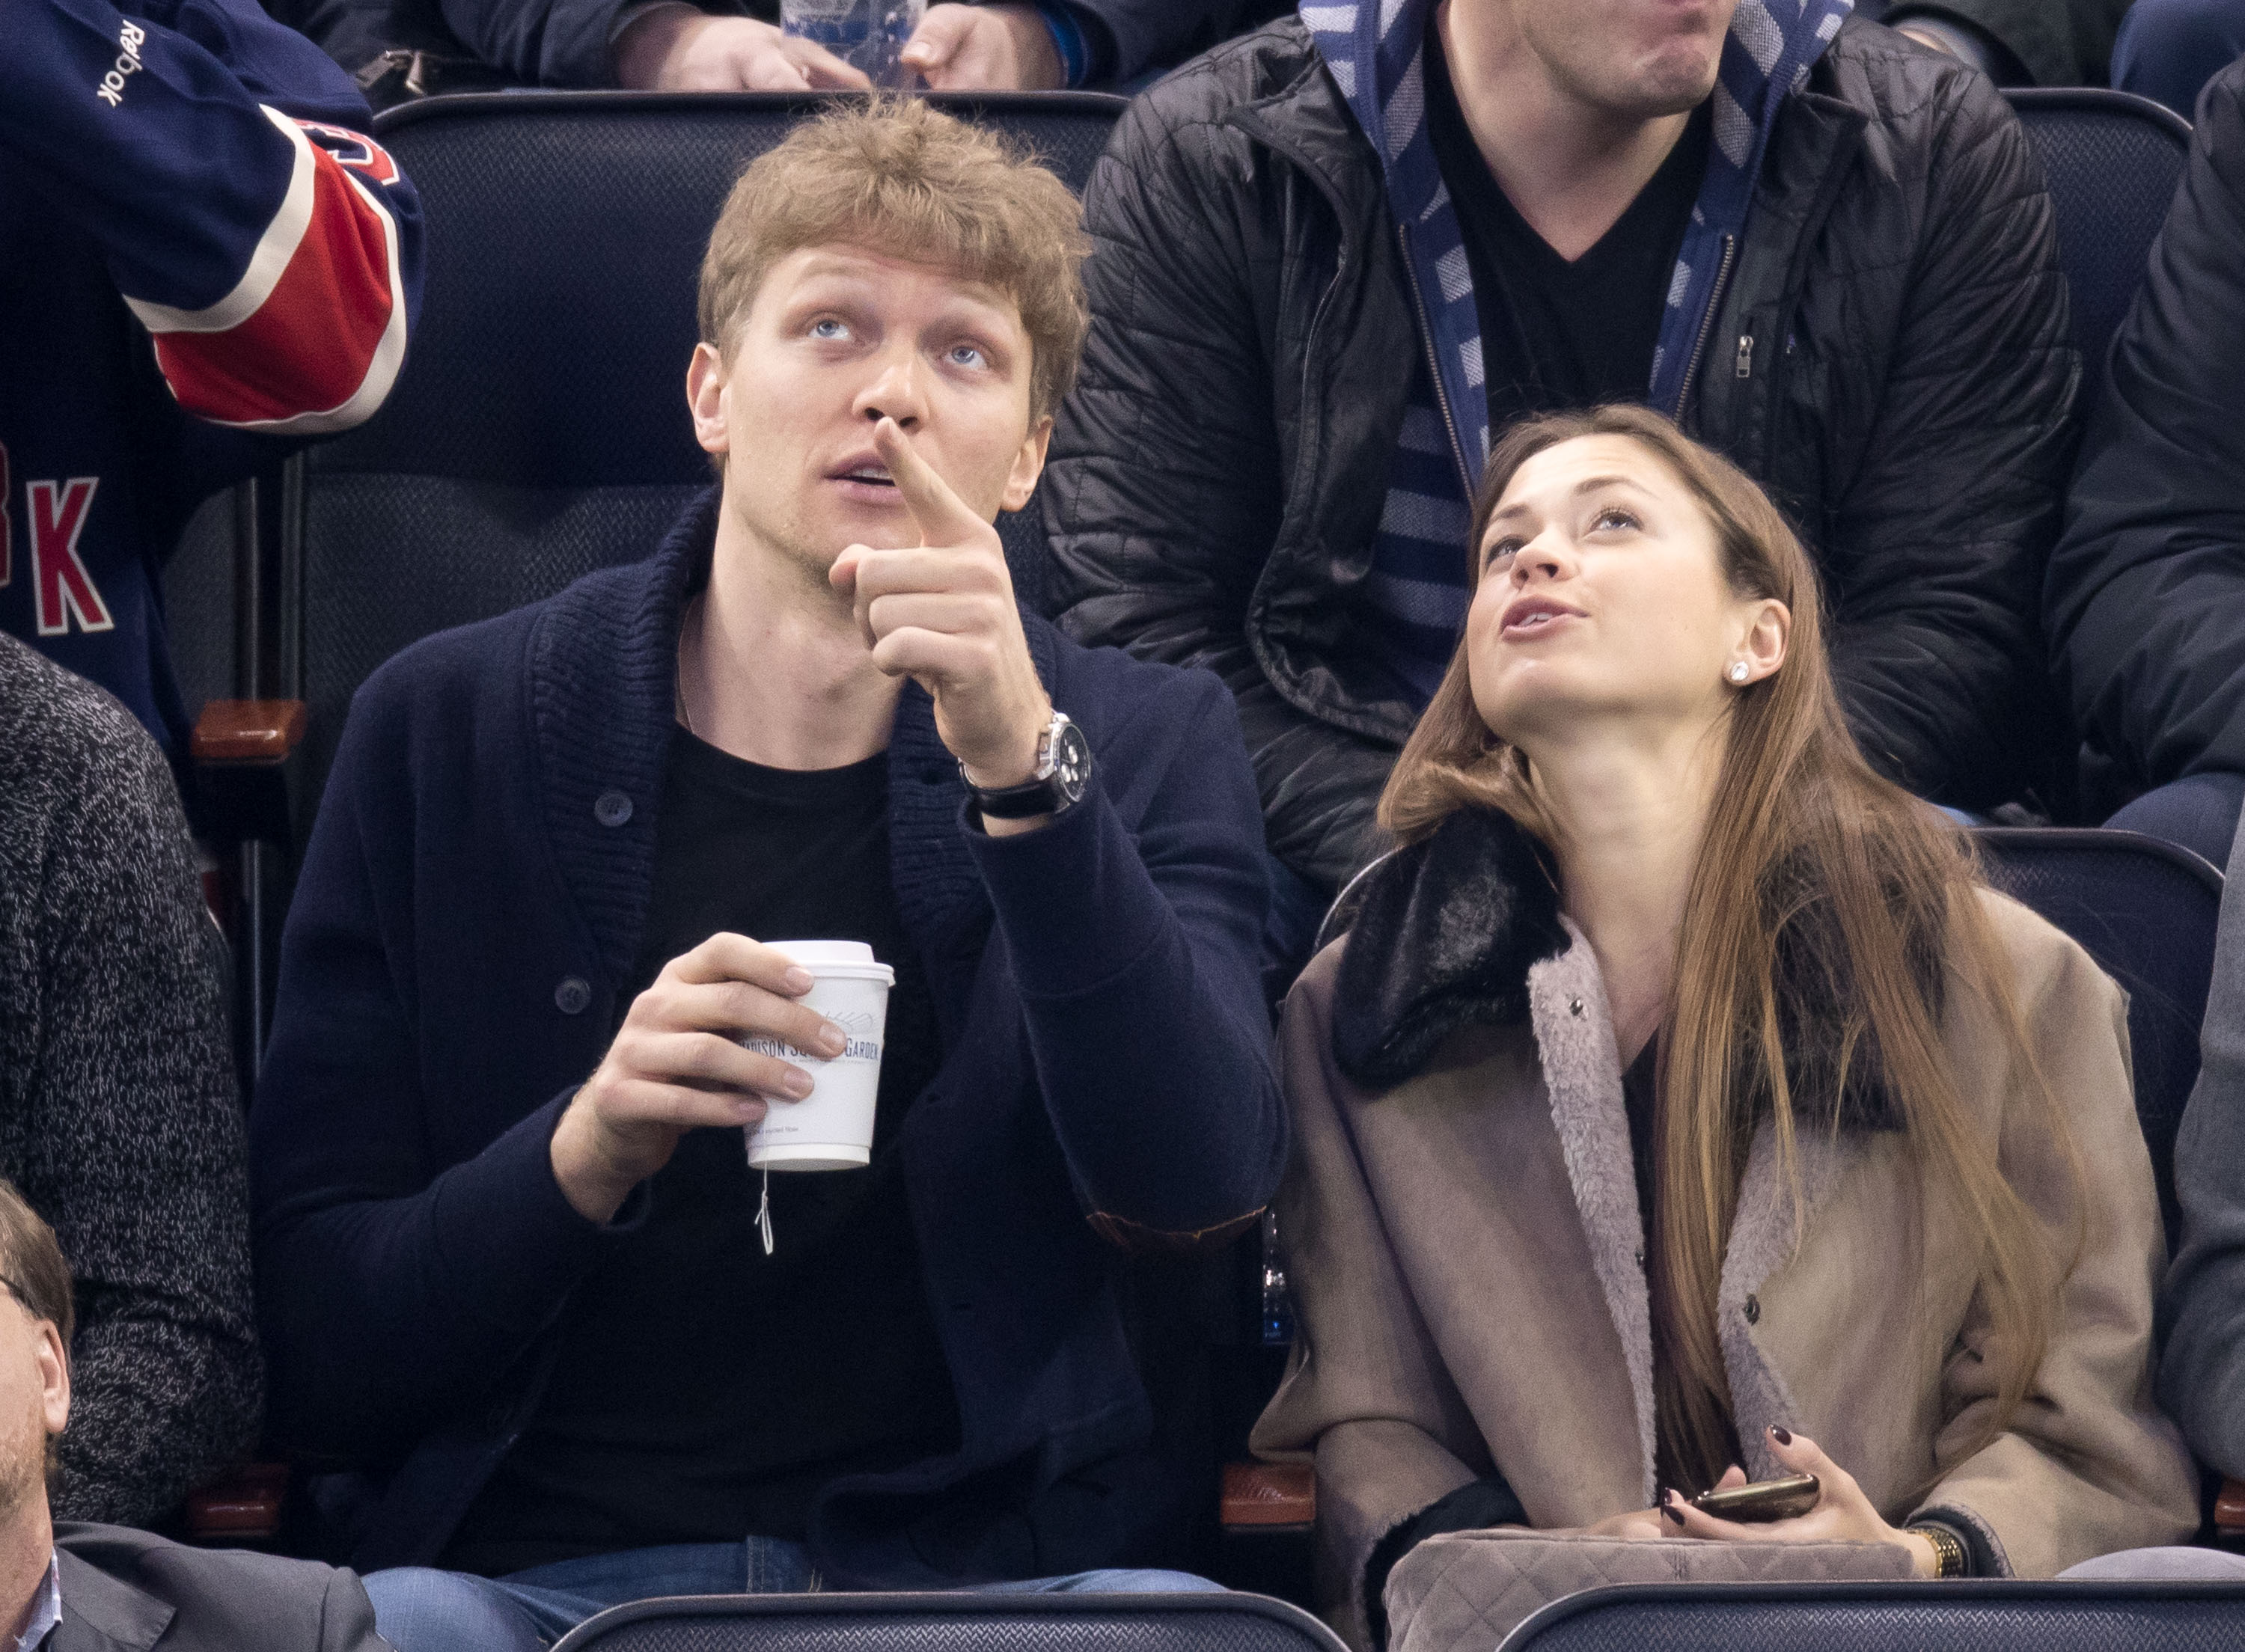 NEW YORK, NY - FEBRUARY 07: Mindaugas Kuzminskas and Egle Andreikaite attend Anaheim Ducks Vs. New York Rangers game at Madison Square Garden on February 7, 2017 in New York City. (Photo by GED/NHL/Getty Images)